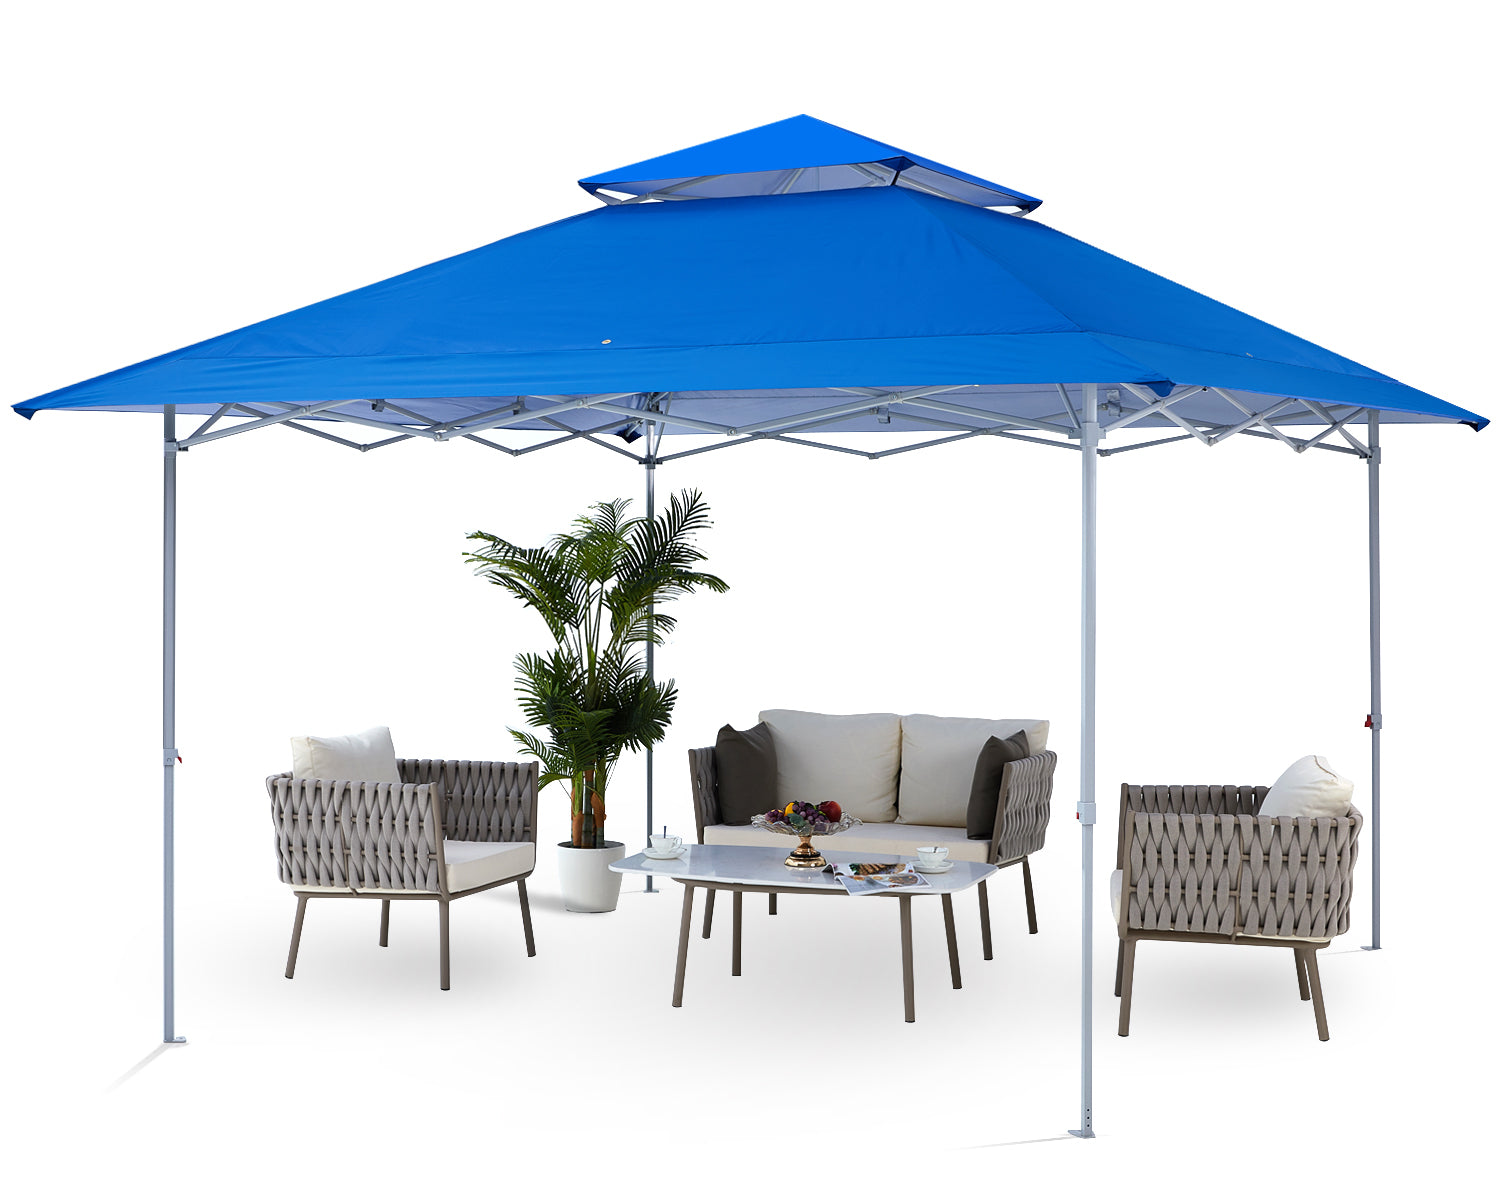 Outdoor Easy Set-up Portable Canopy Tent 13x13 With Vented Top